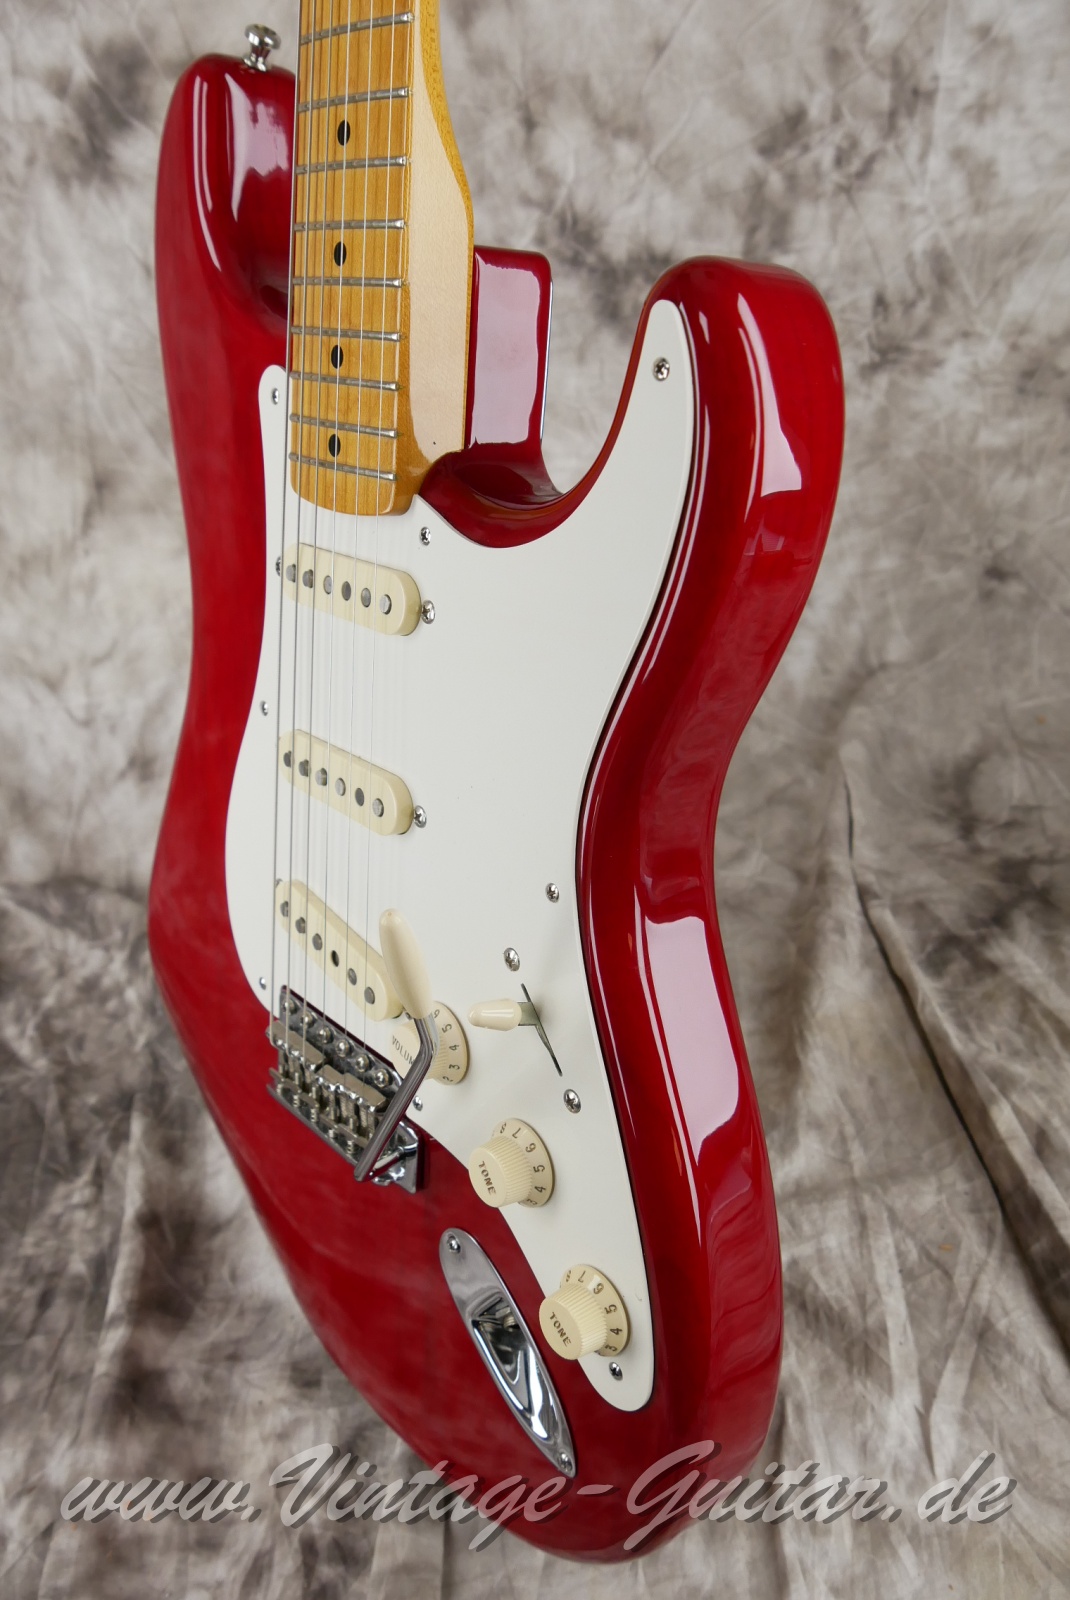 Fender_Stratocaster_classic_50s_Mexico_transparent_red_2010-010.JPG